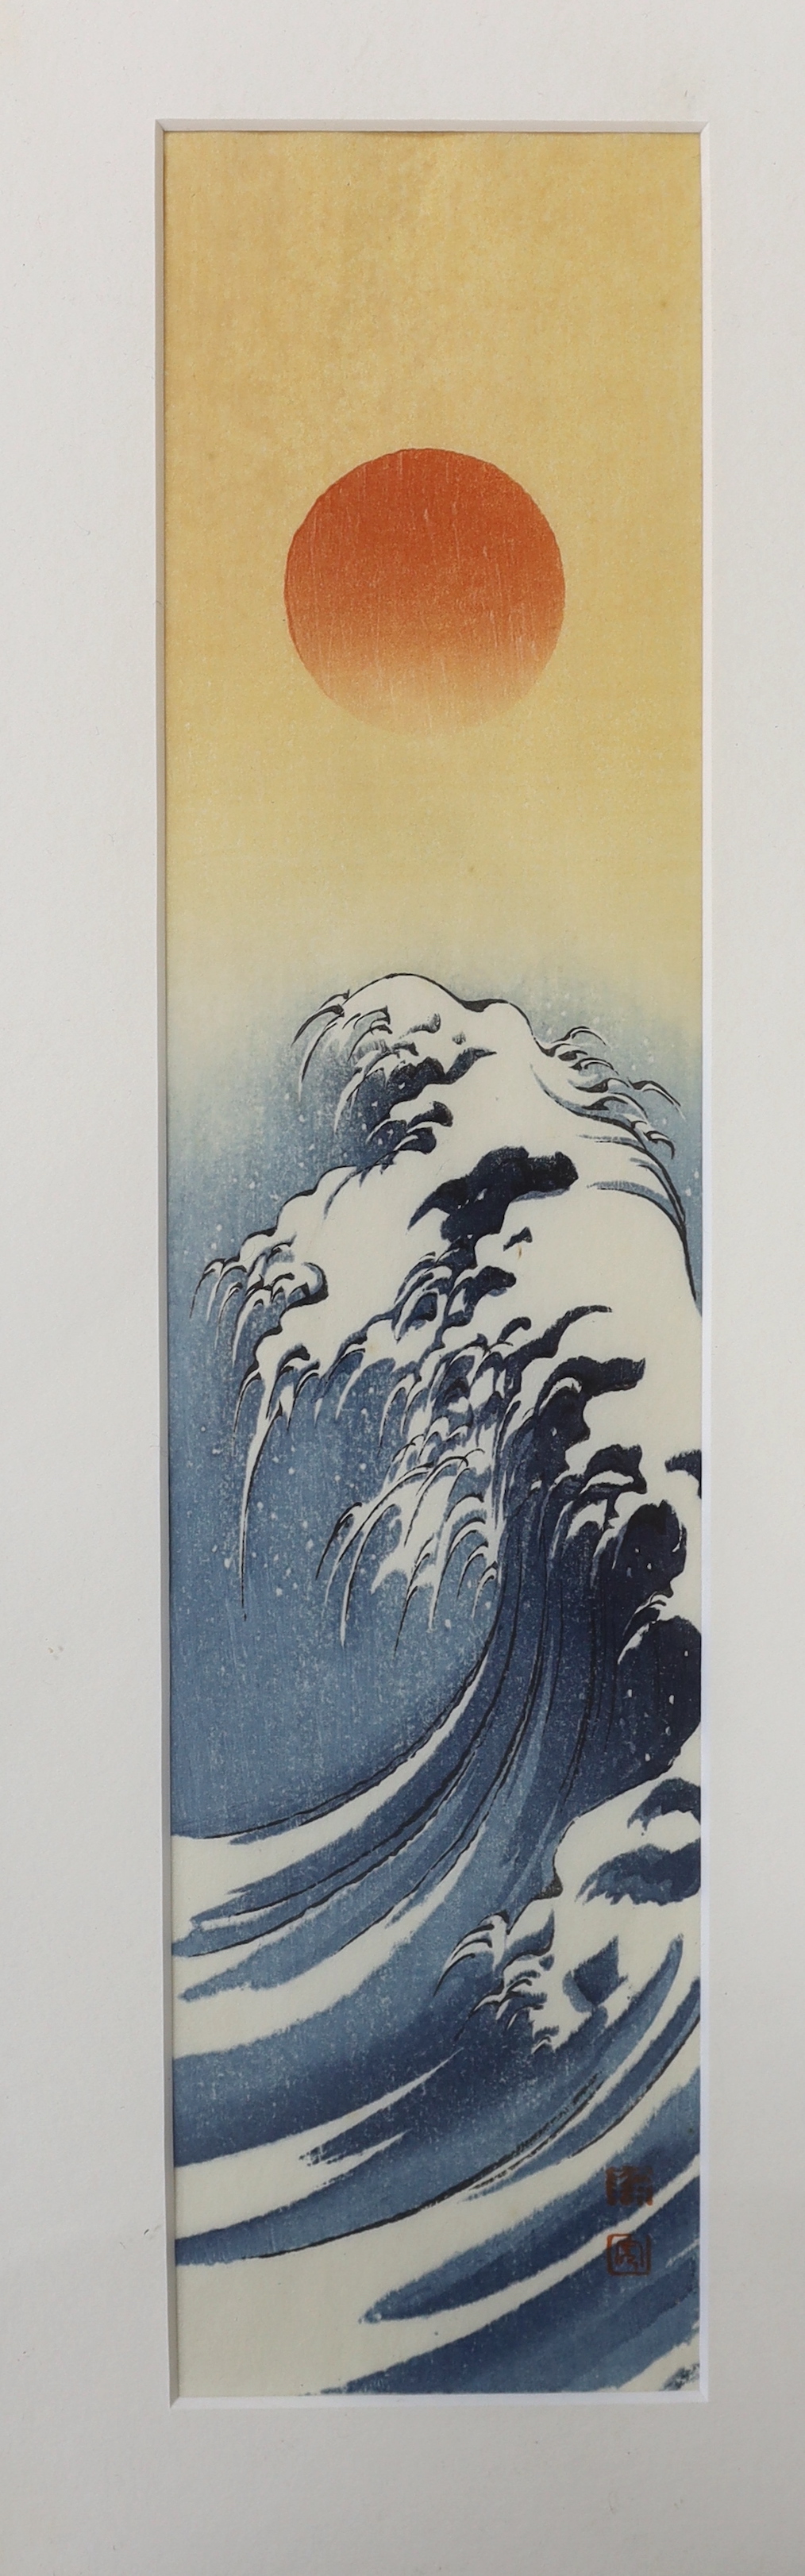 Shoda Koho (1871-1946) two woodblock prints, Great wave at sunrise and rainy day frog and Yoshimito Gesso, woodblock print, Dragon (3), largest 36cm x 8cm